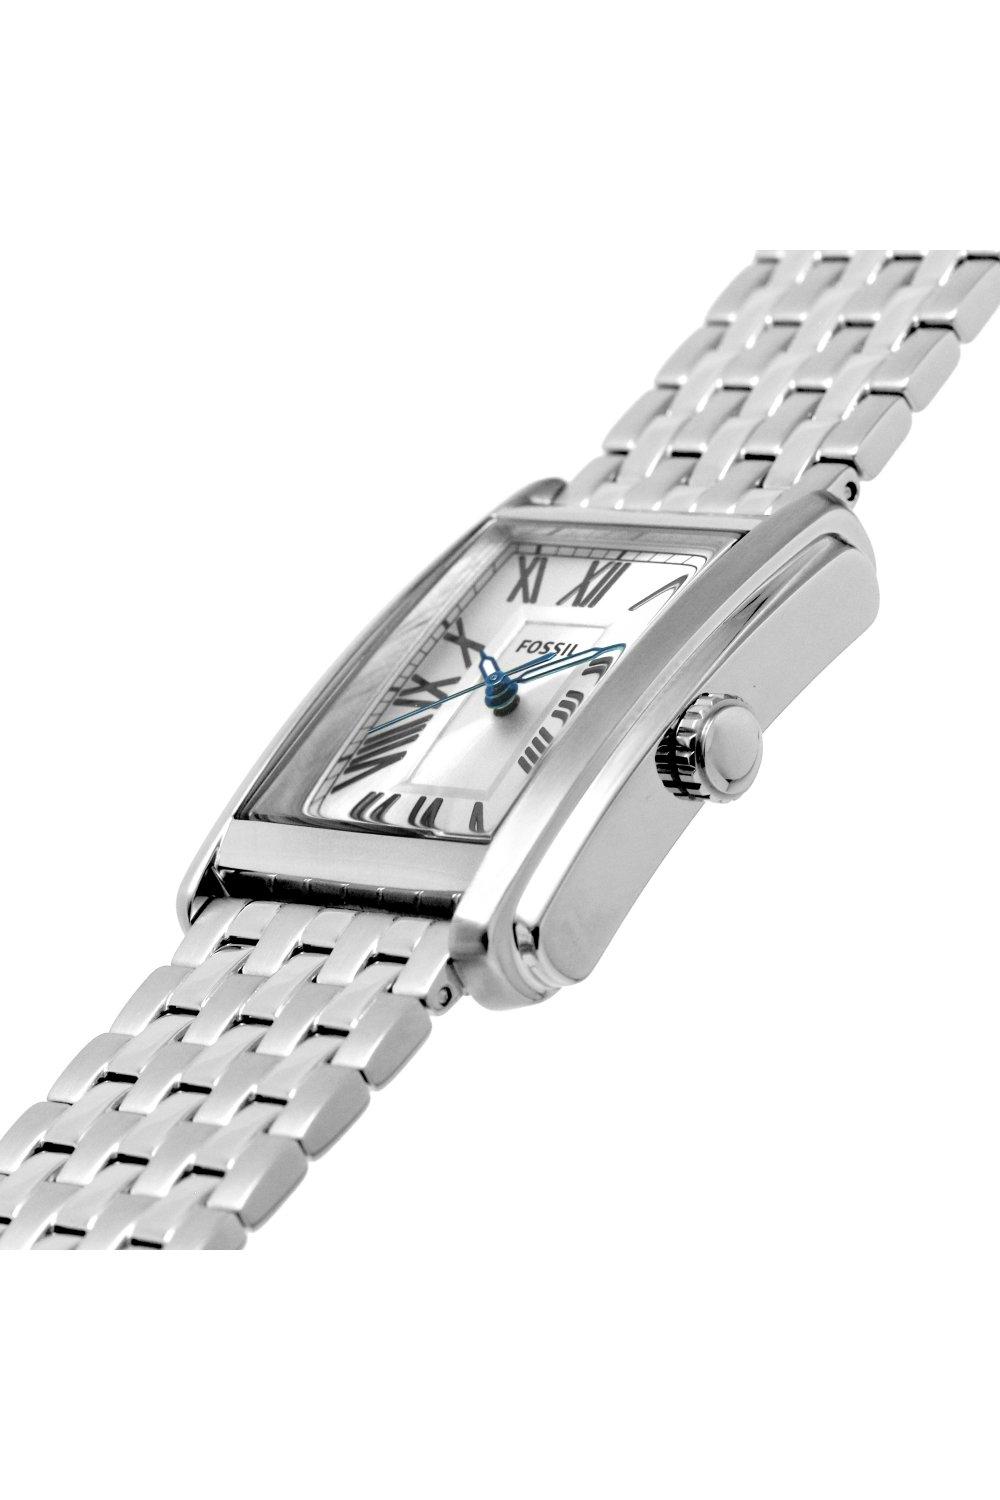 Watches | Carraway Stainless Steel Fashion Analogue Quartz Watch - Fs6008 |  Fossil